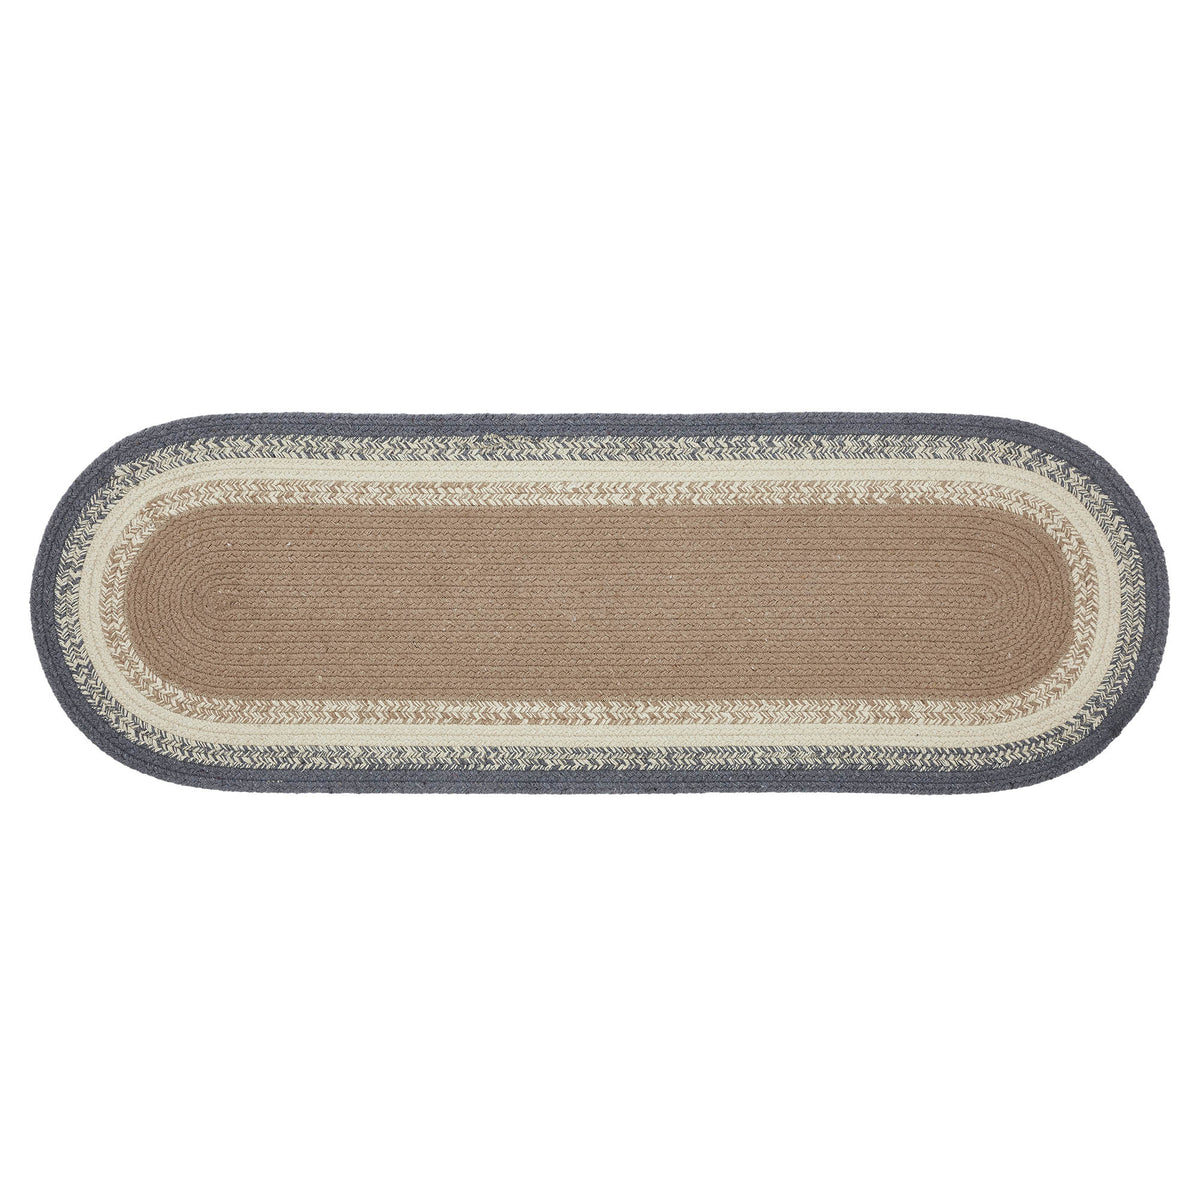 Finders Keepers Oval Runner 12x36